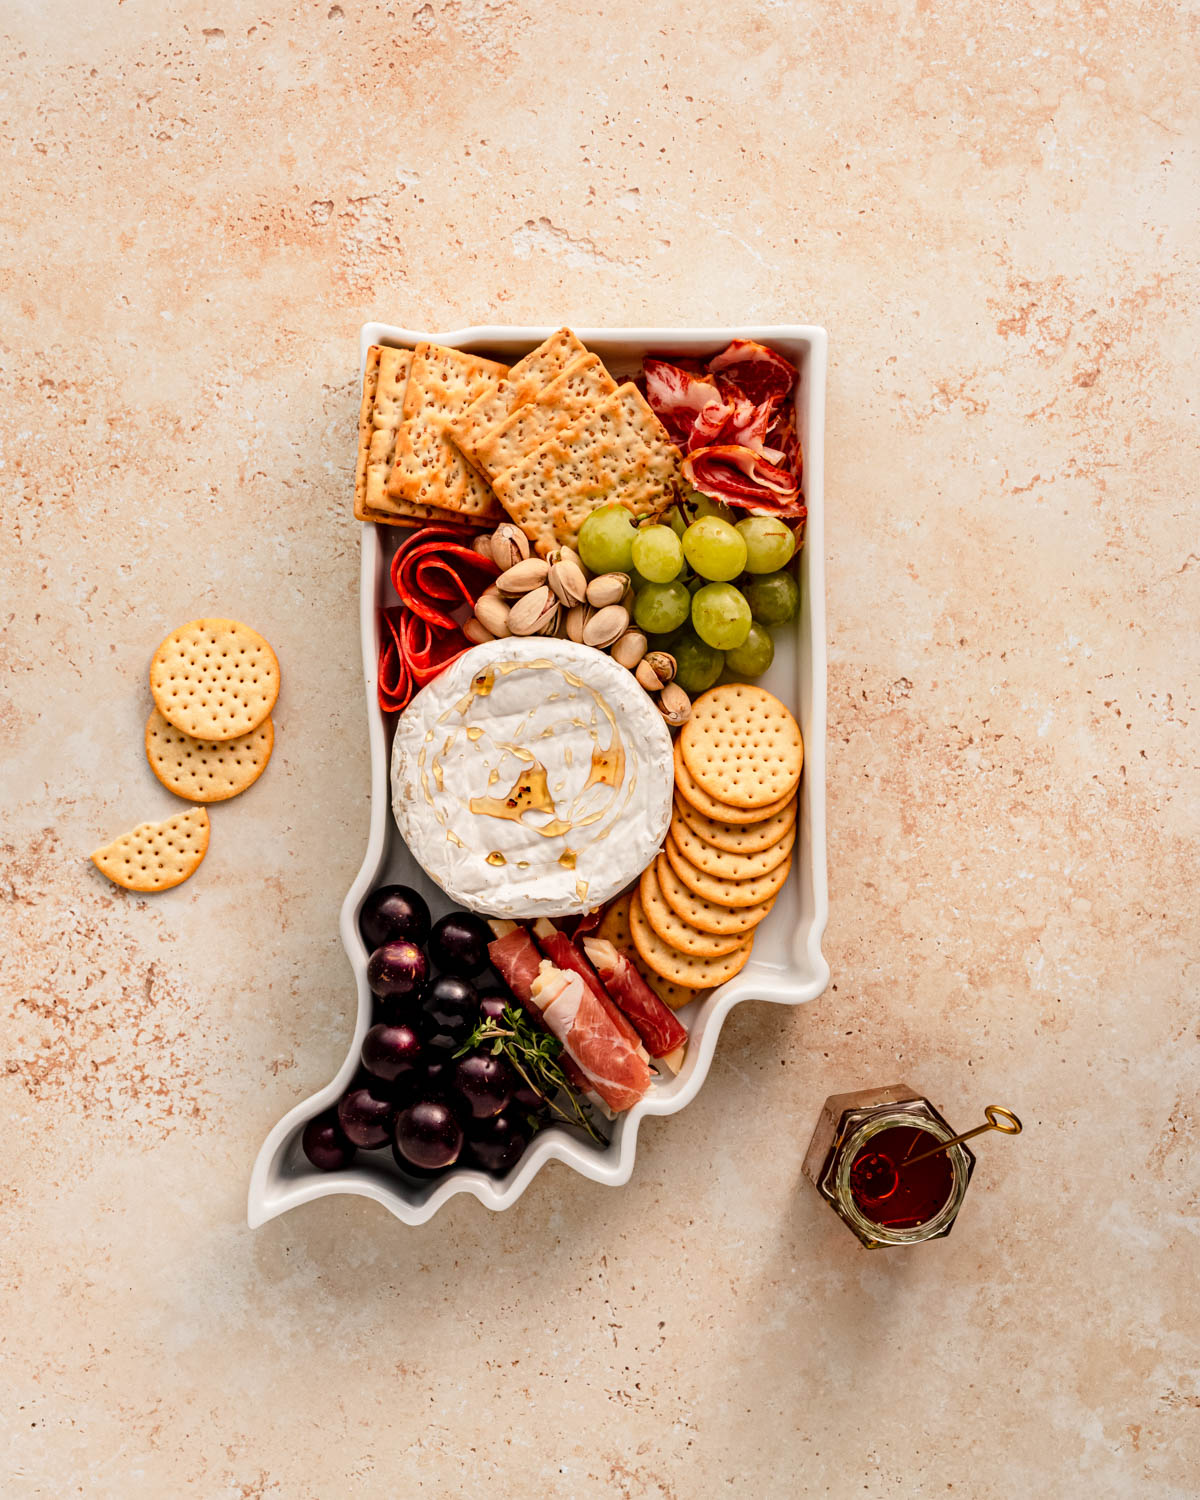 charcuterie board with cheese and cured meats in a Indiana shaped serving tray platter dish